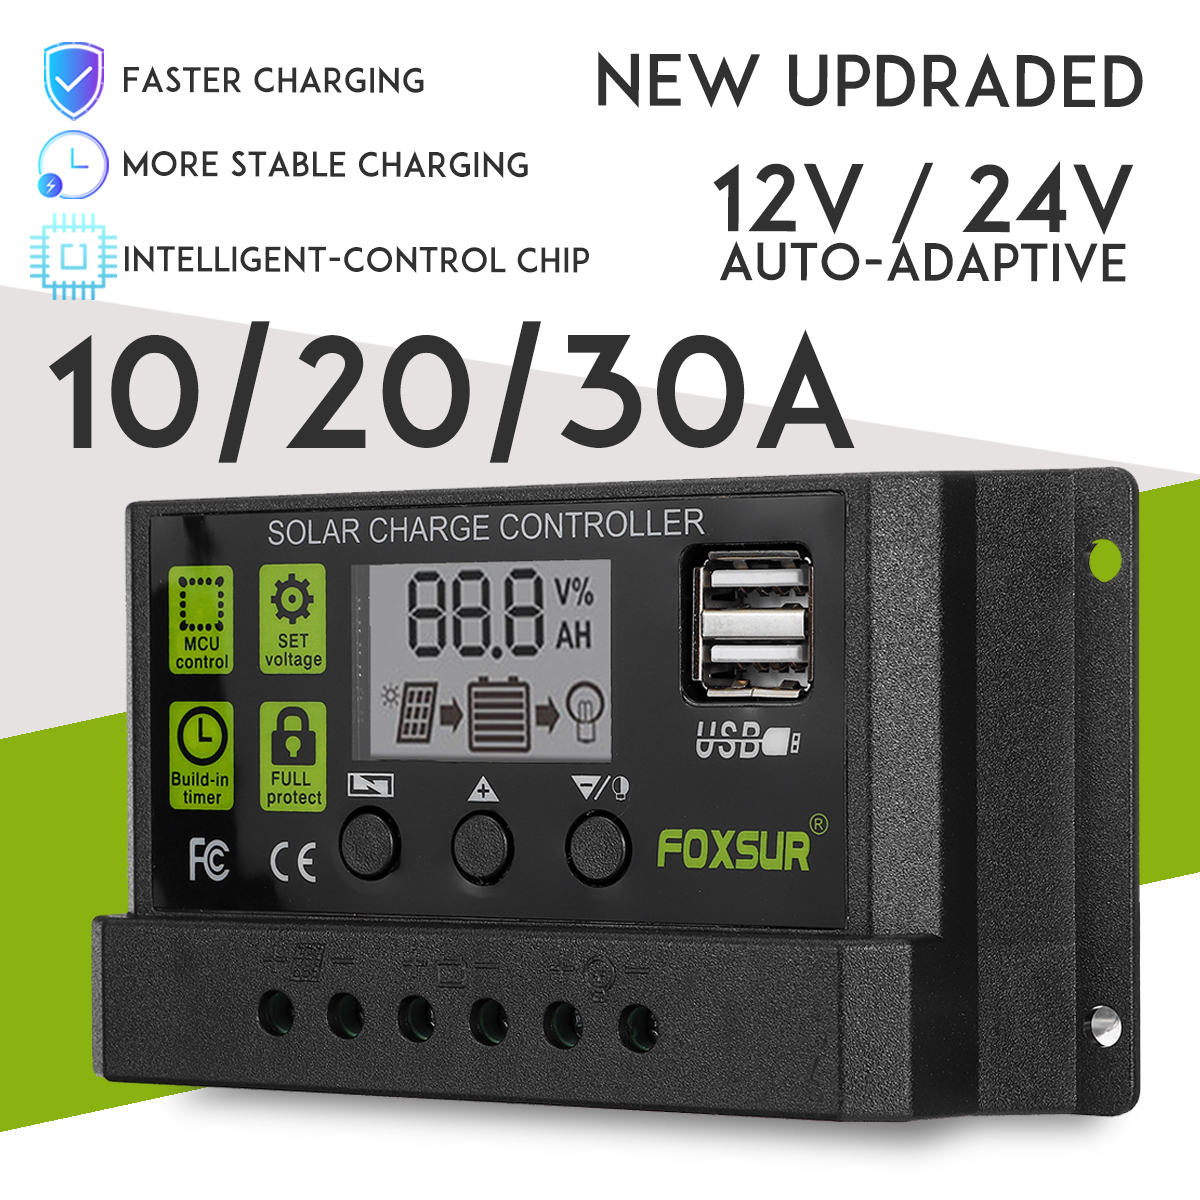 102030A-12V24V-Solar-Controller-Auto-Adaptive-LCD-Display-PWM-Solar-Charge-Controller-Solar-Panel-Ch-1574115-2